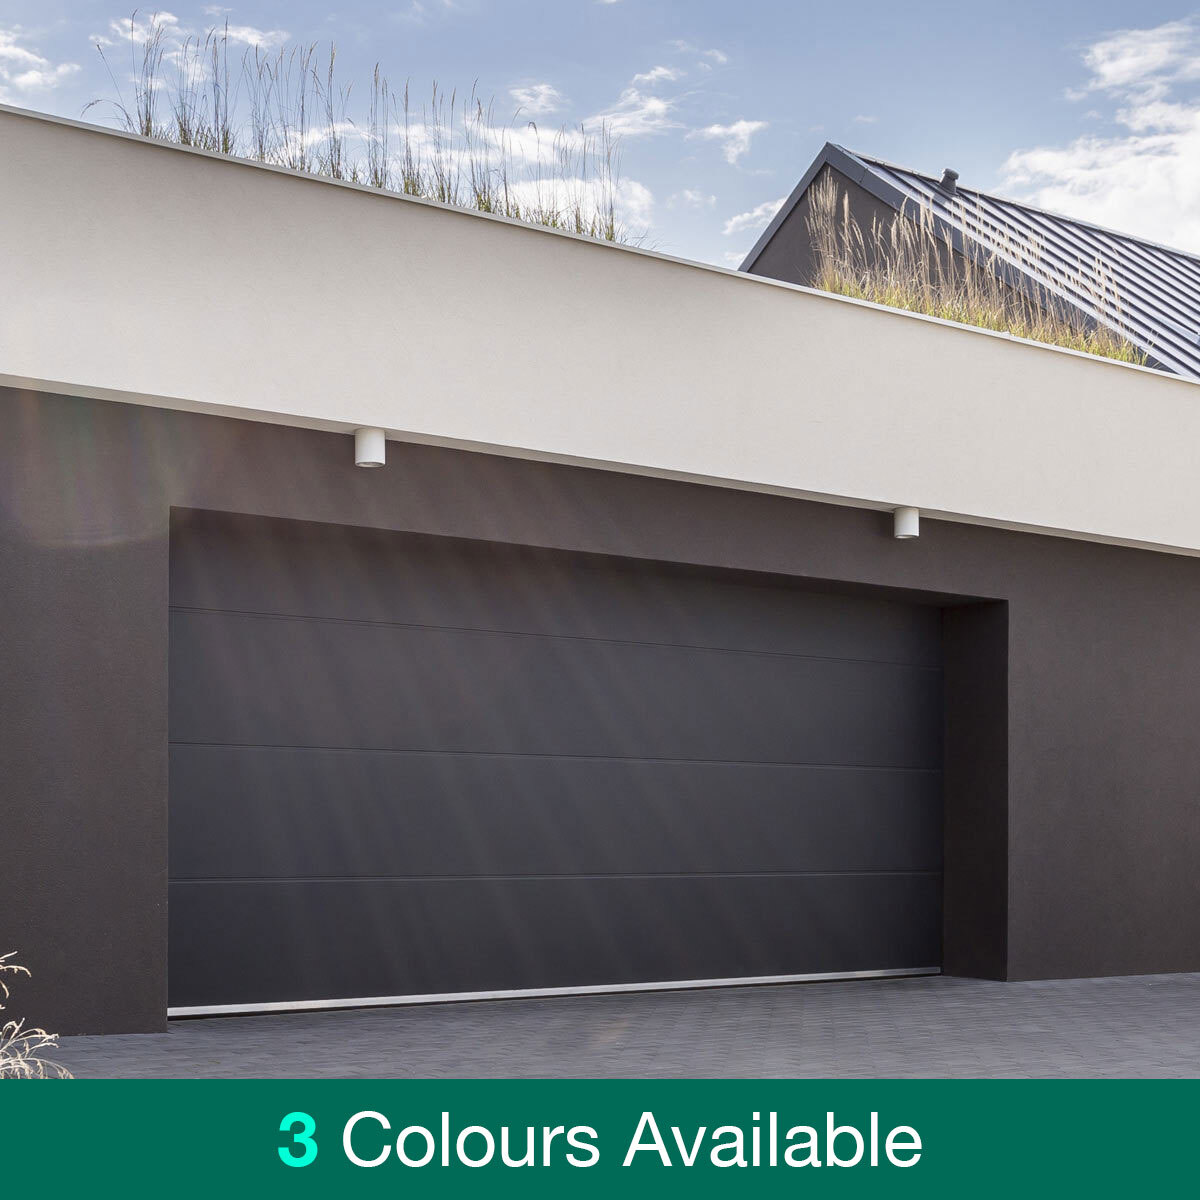 Birkdale Automatic Sectional Garage Door with Installation up to 4.5m Wide